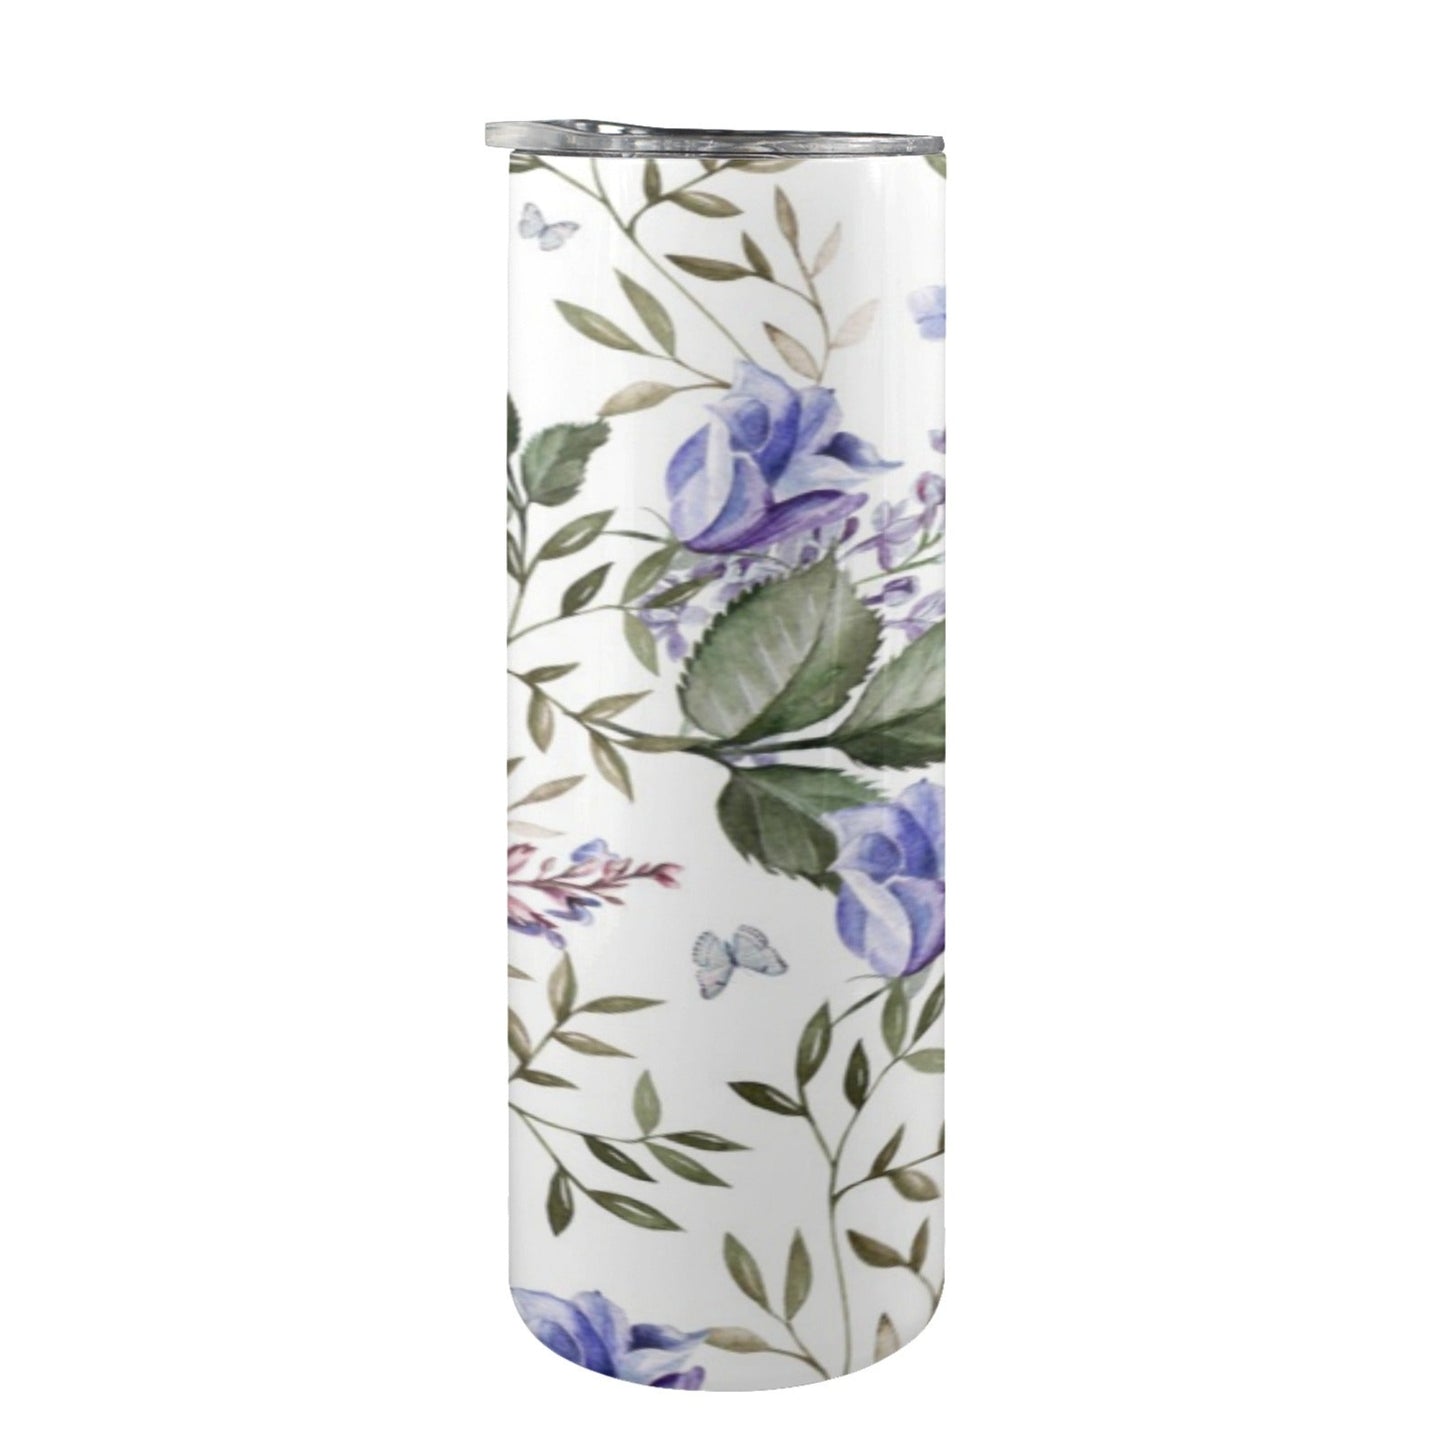 Blue Flowers - 20oz Tall Skinny Tumbler with Lid and Straw 20oz Tall Skinny Tumbler with Lid and Straw